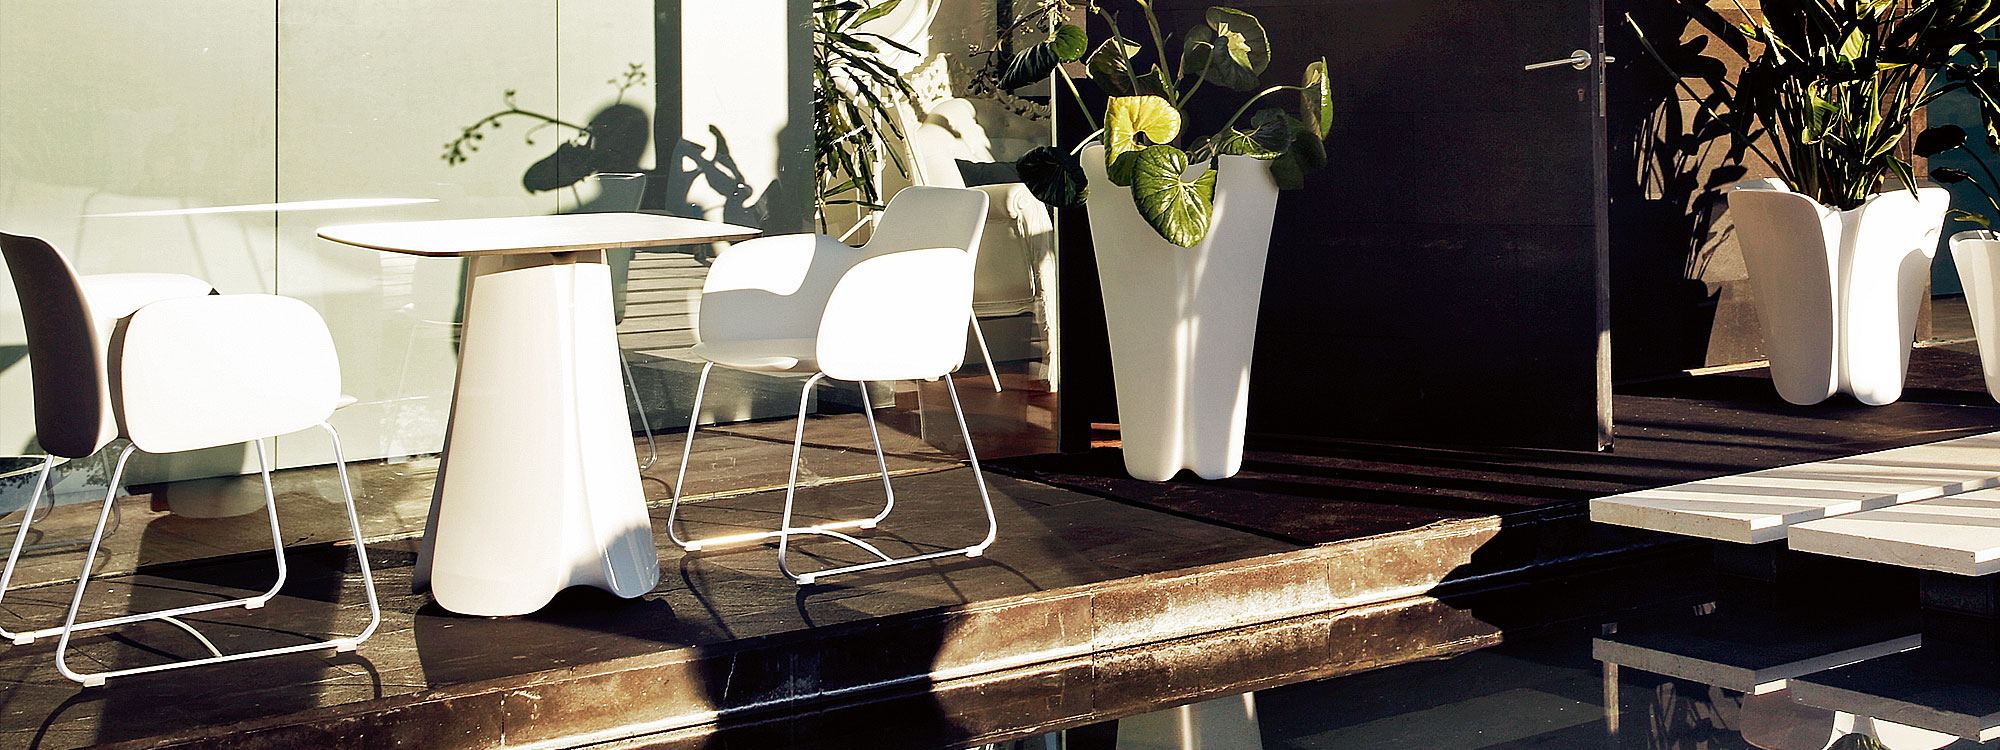 Image of Vondom Pezzettina modern garden table and chairs on sunny decking next to water feature